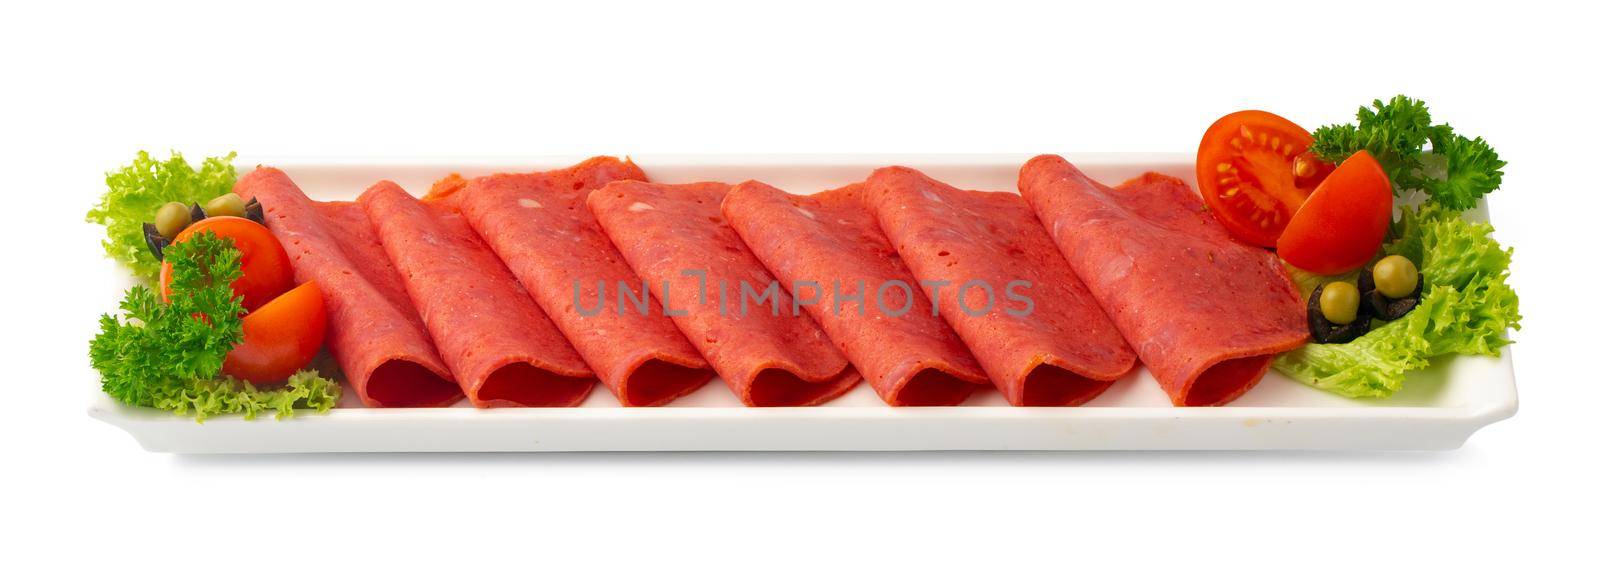 Cold smoked meat plate with salad leaves isolated on white background